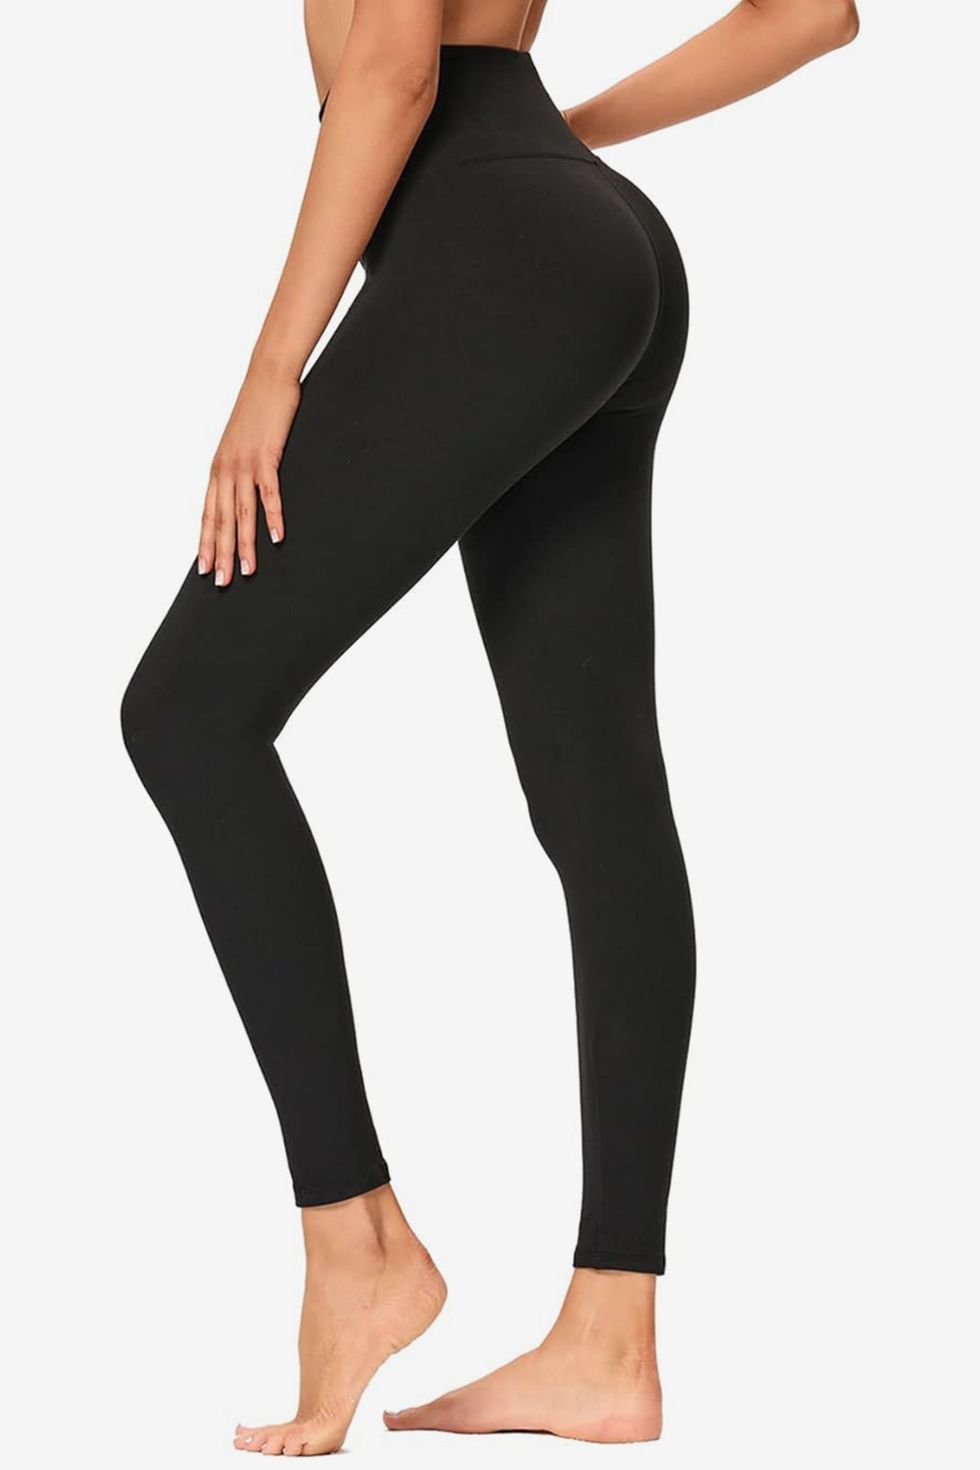 Large, Black) - Gayhay High Waist Yoga Pants with Pockets for Women - Tummy  Control Workout Running 4 Way Stretch Yoga Leggings